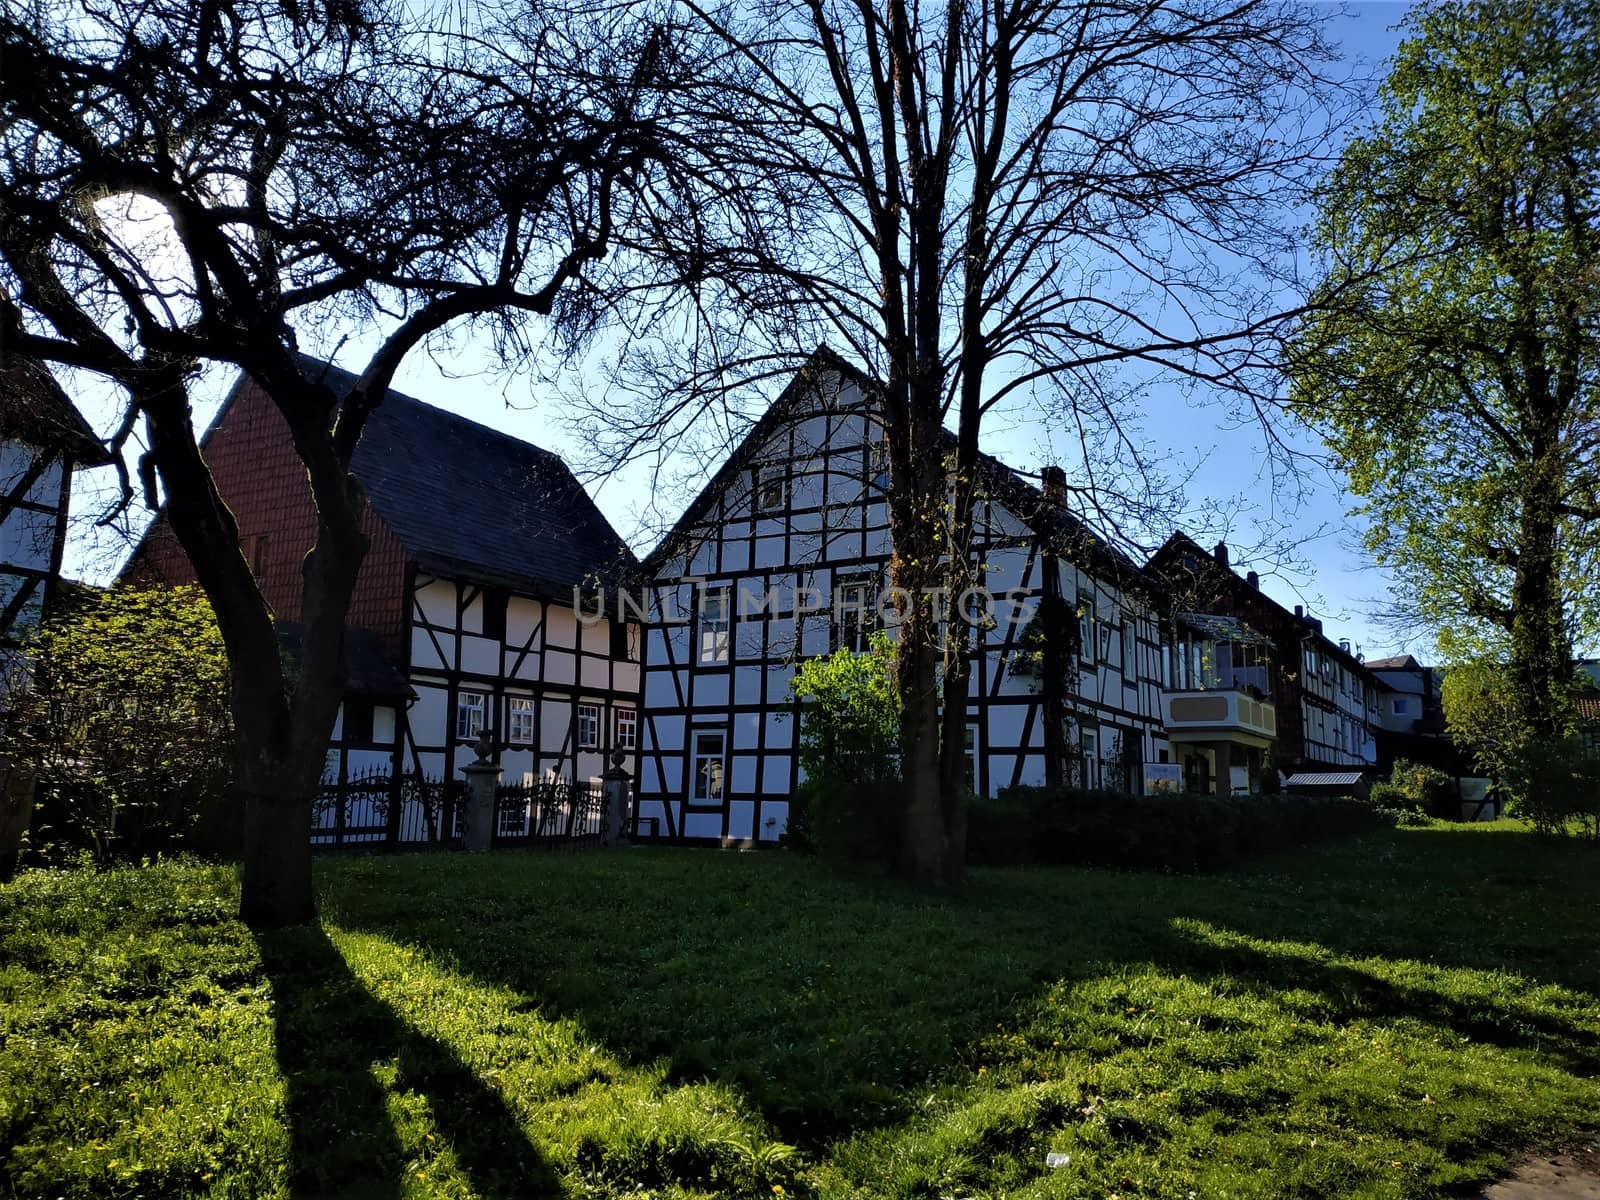 Central park in the city of Einbeck with half-timbered houses by pisces2386